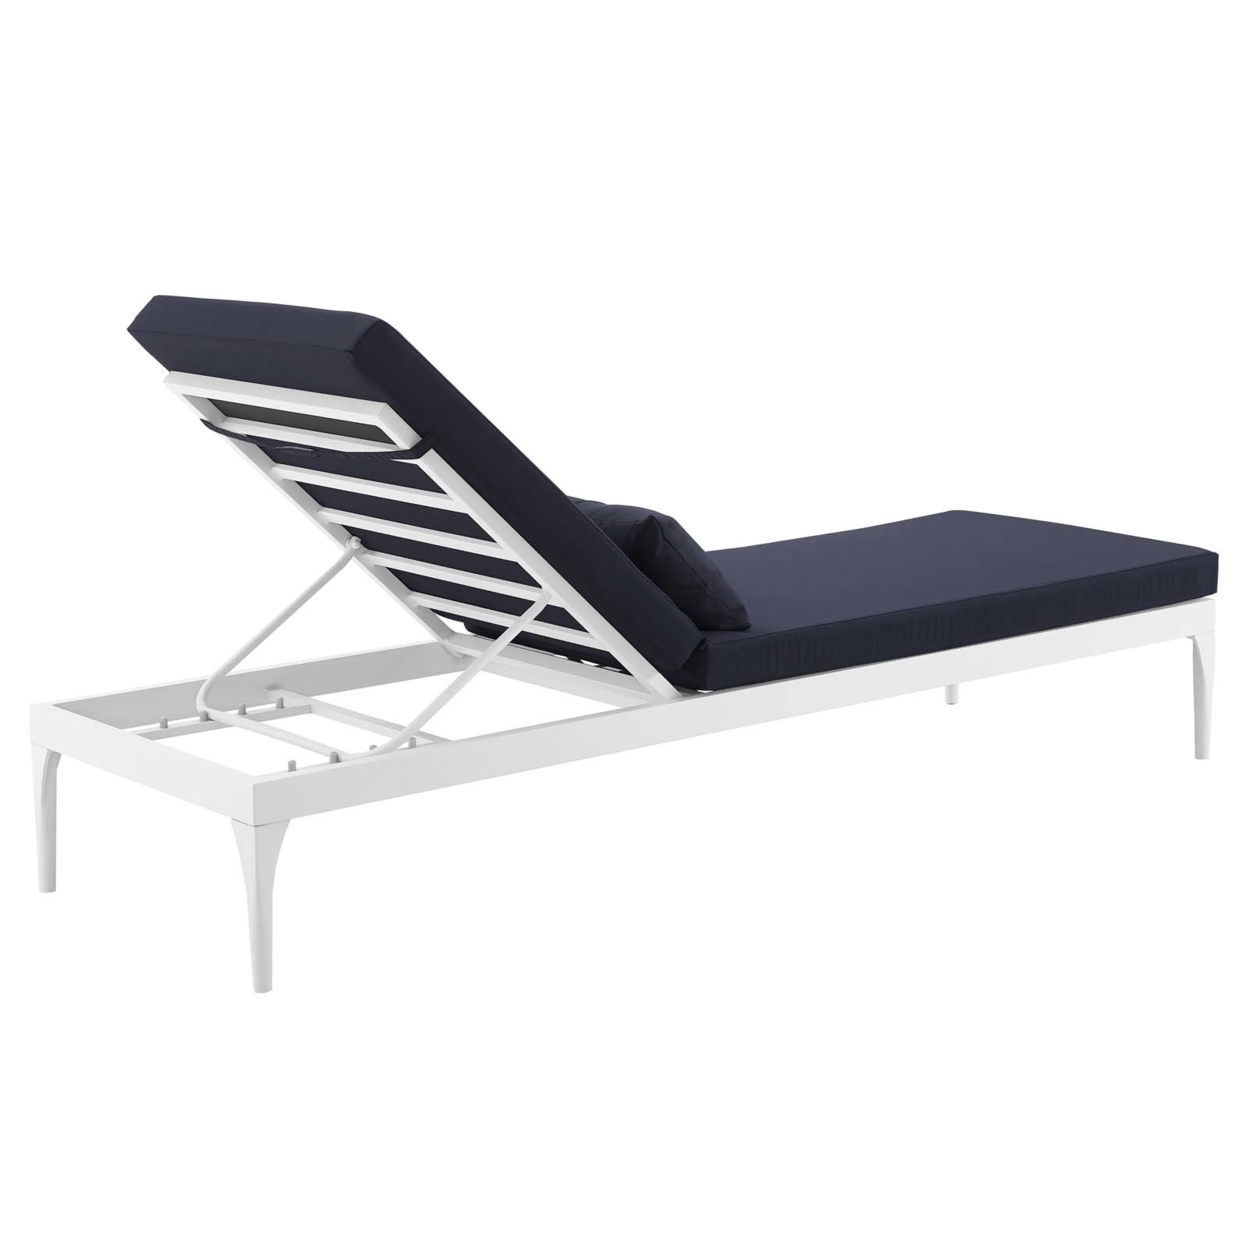 Perspective Cushion Outdoor Patio Chaise Lounge Chair (3301-WHI-NAV)